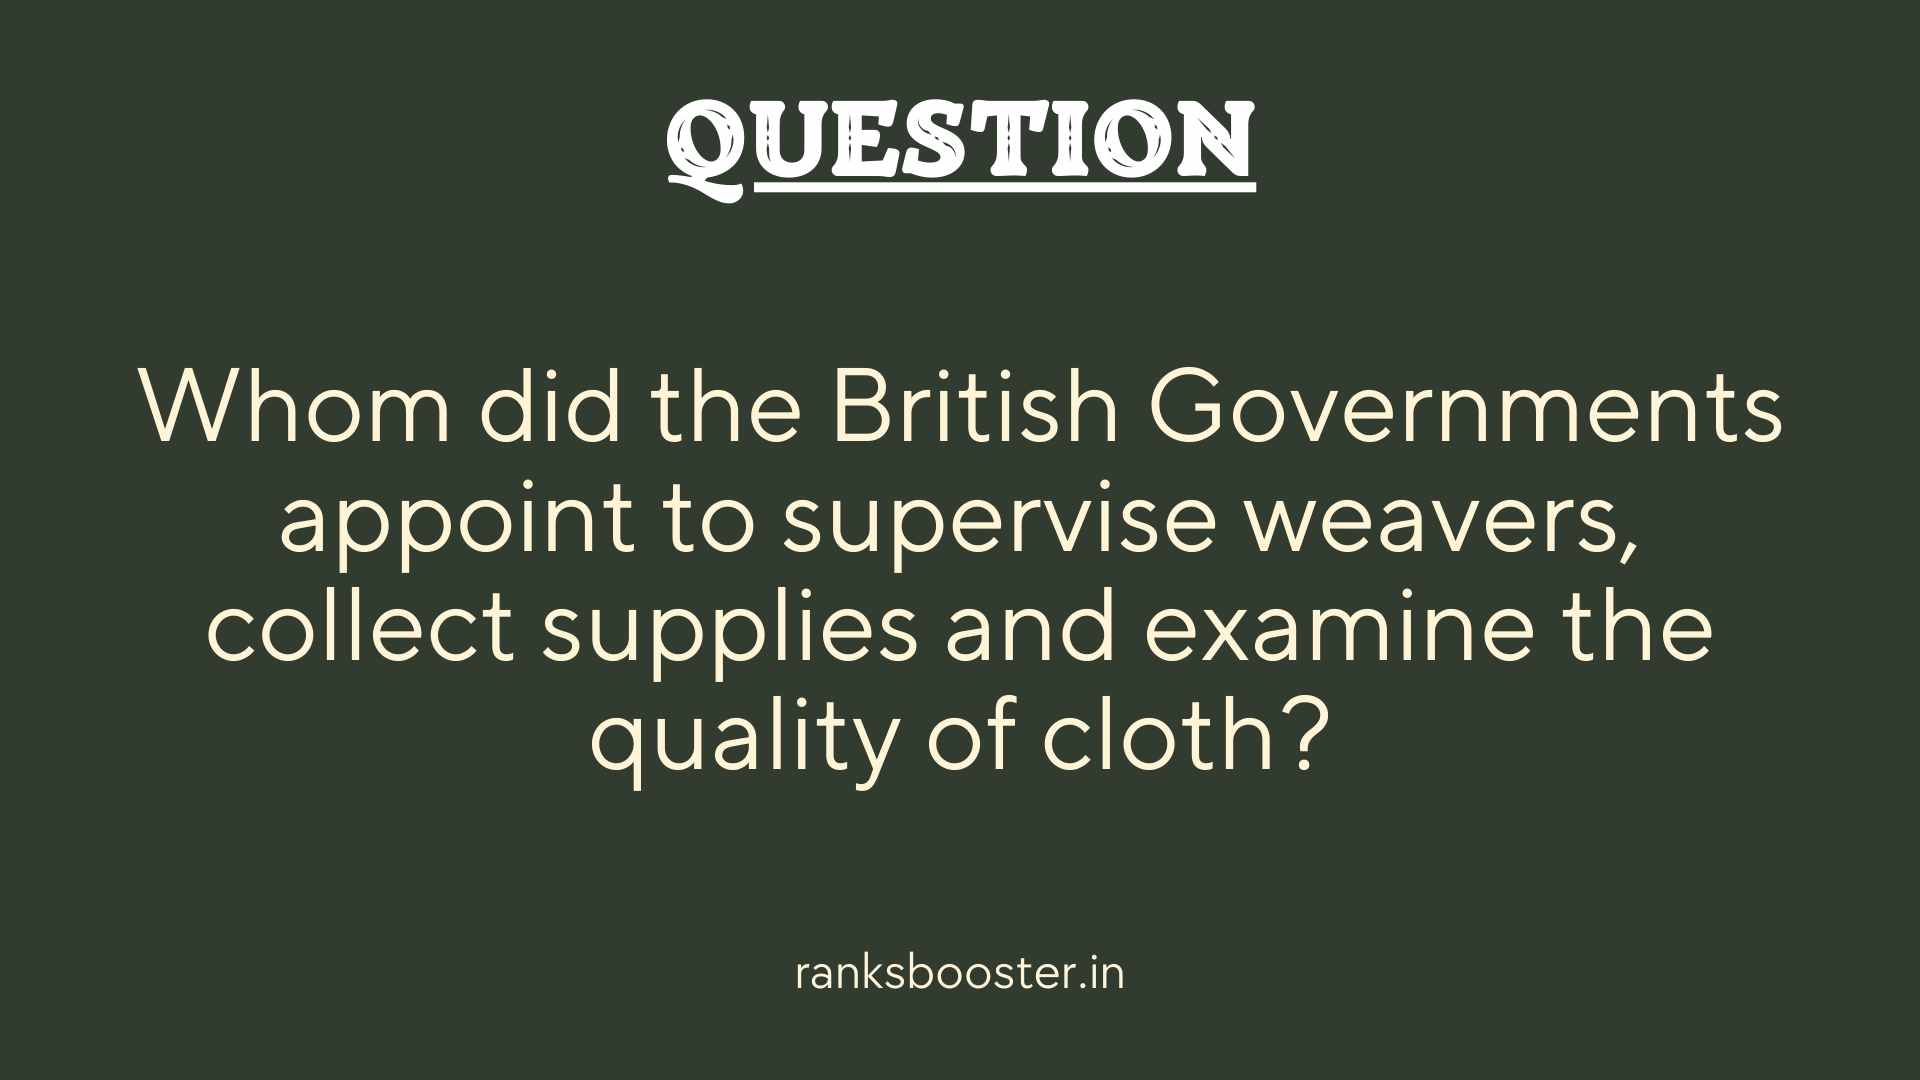 Question: Whom did the British Governments appoint to supervise weavers, collect supplies and examine the quality of cloth?